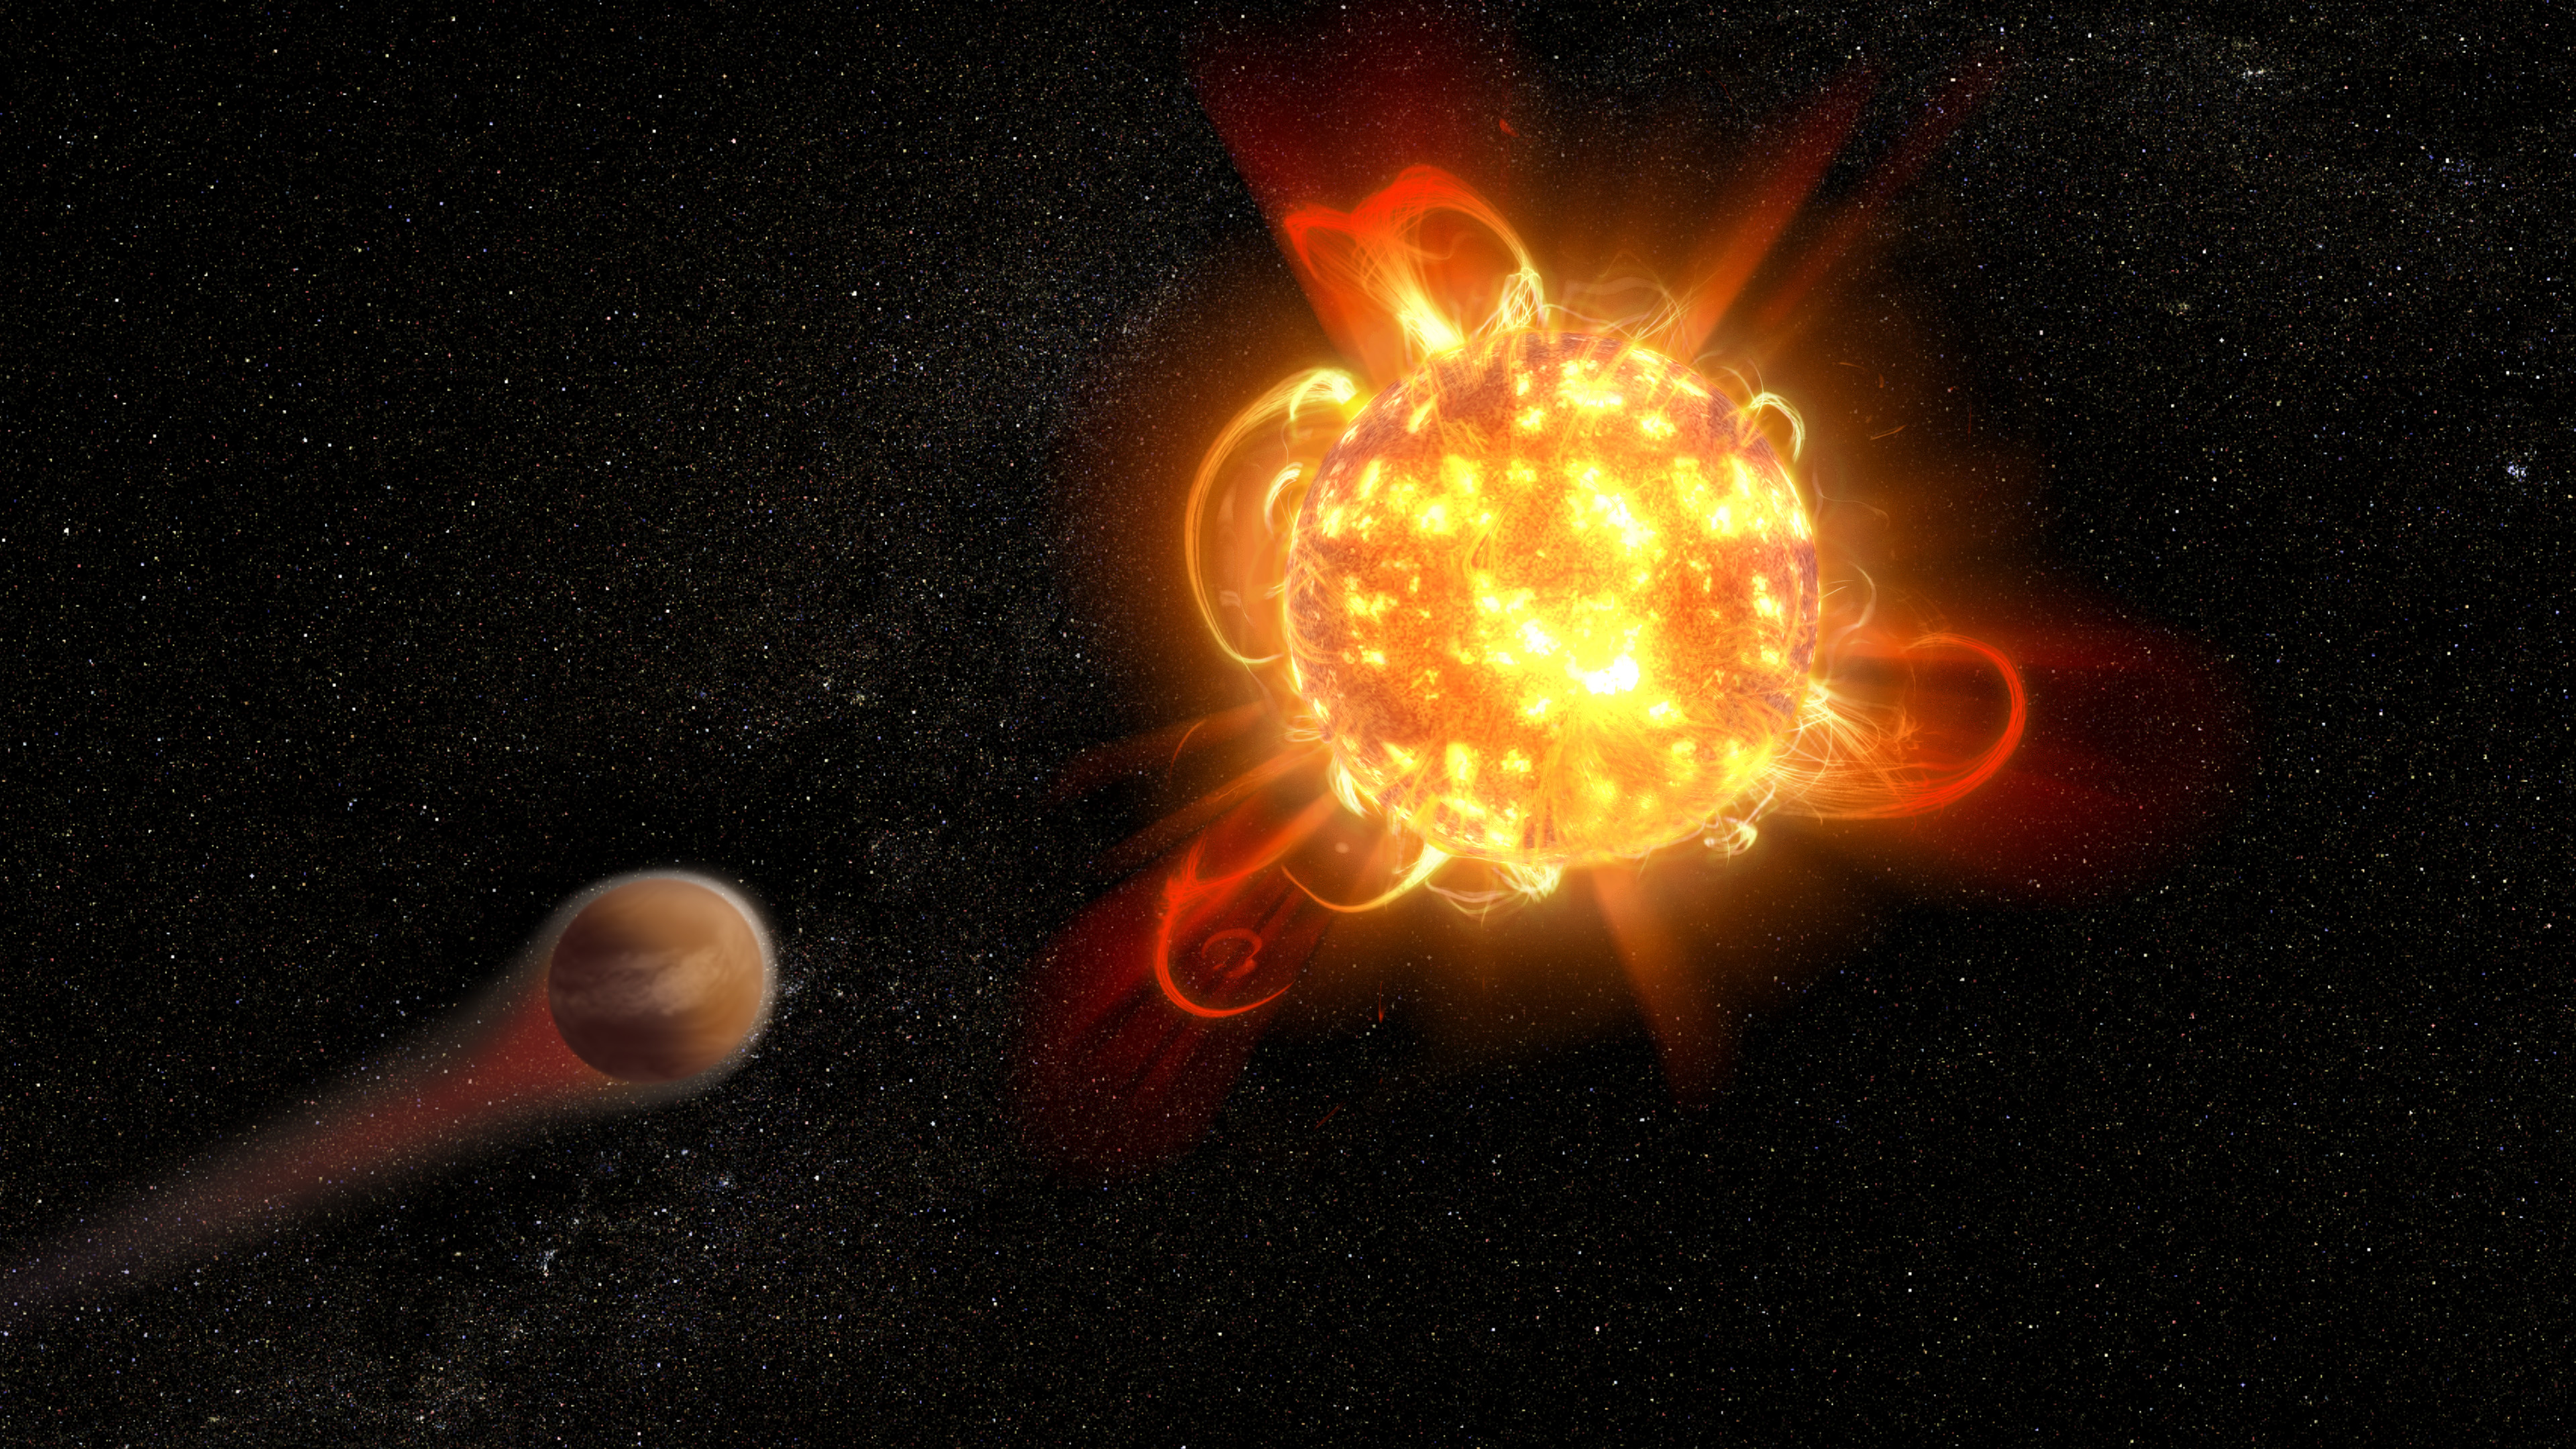 Superflares From Young Red Dwarf Stars Imperil Planets | NASA